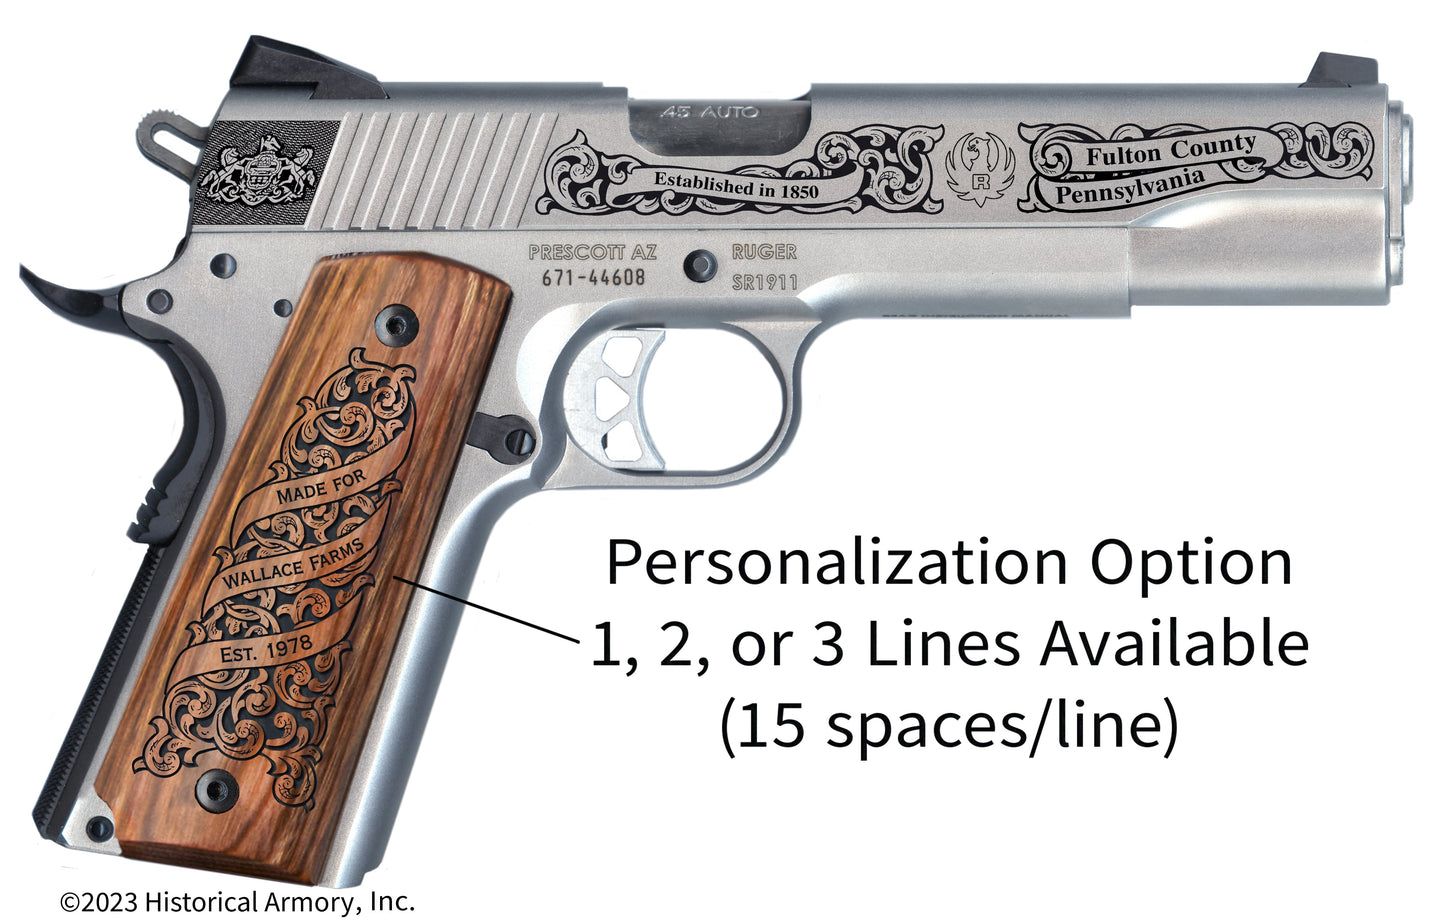 Fulton County Pennsylvania Personalized Engraved .45 Auto Ruger 1911